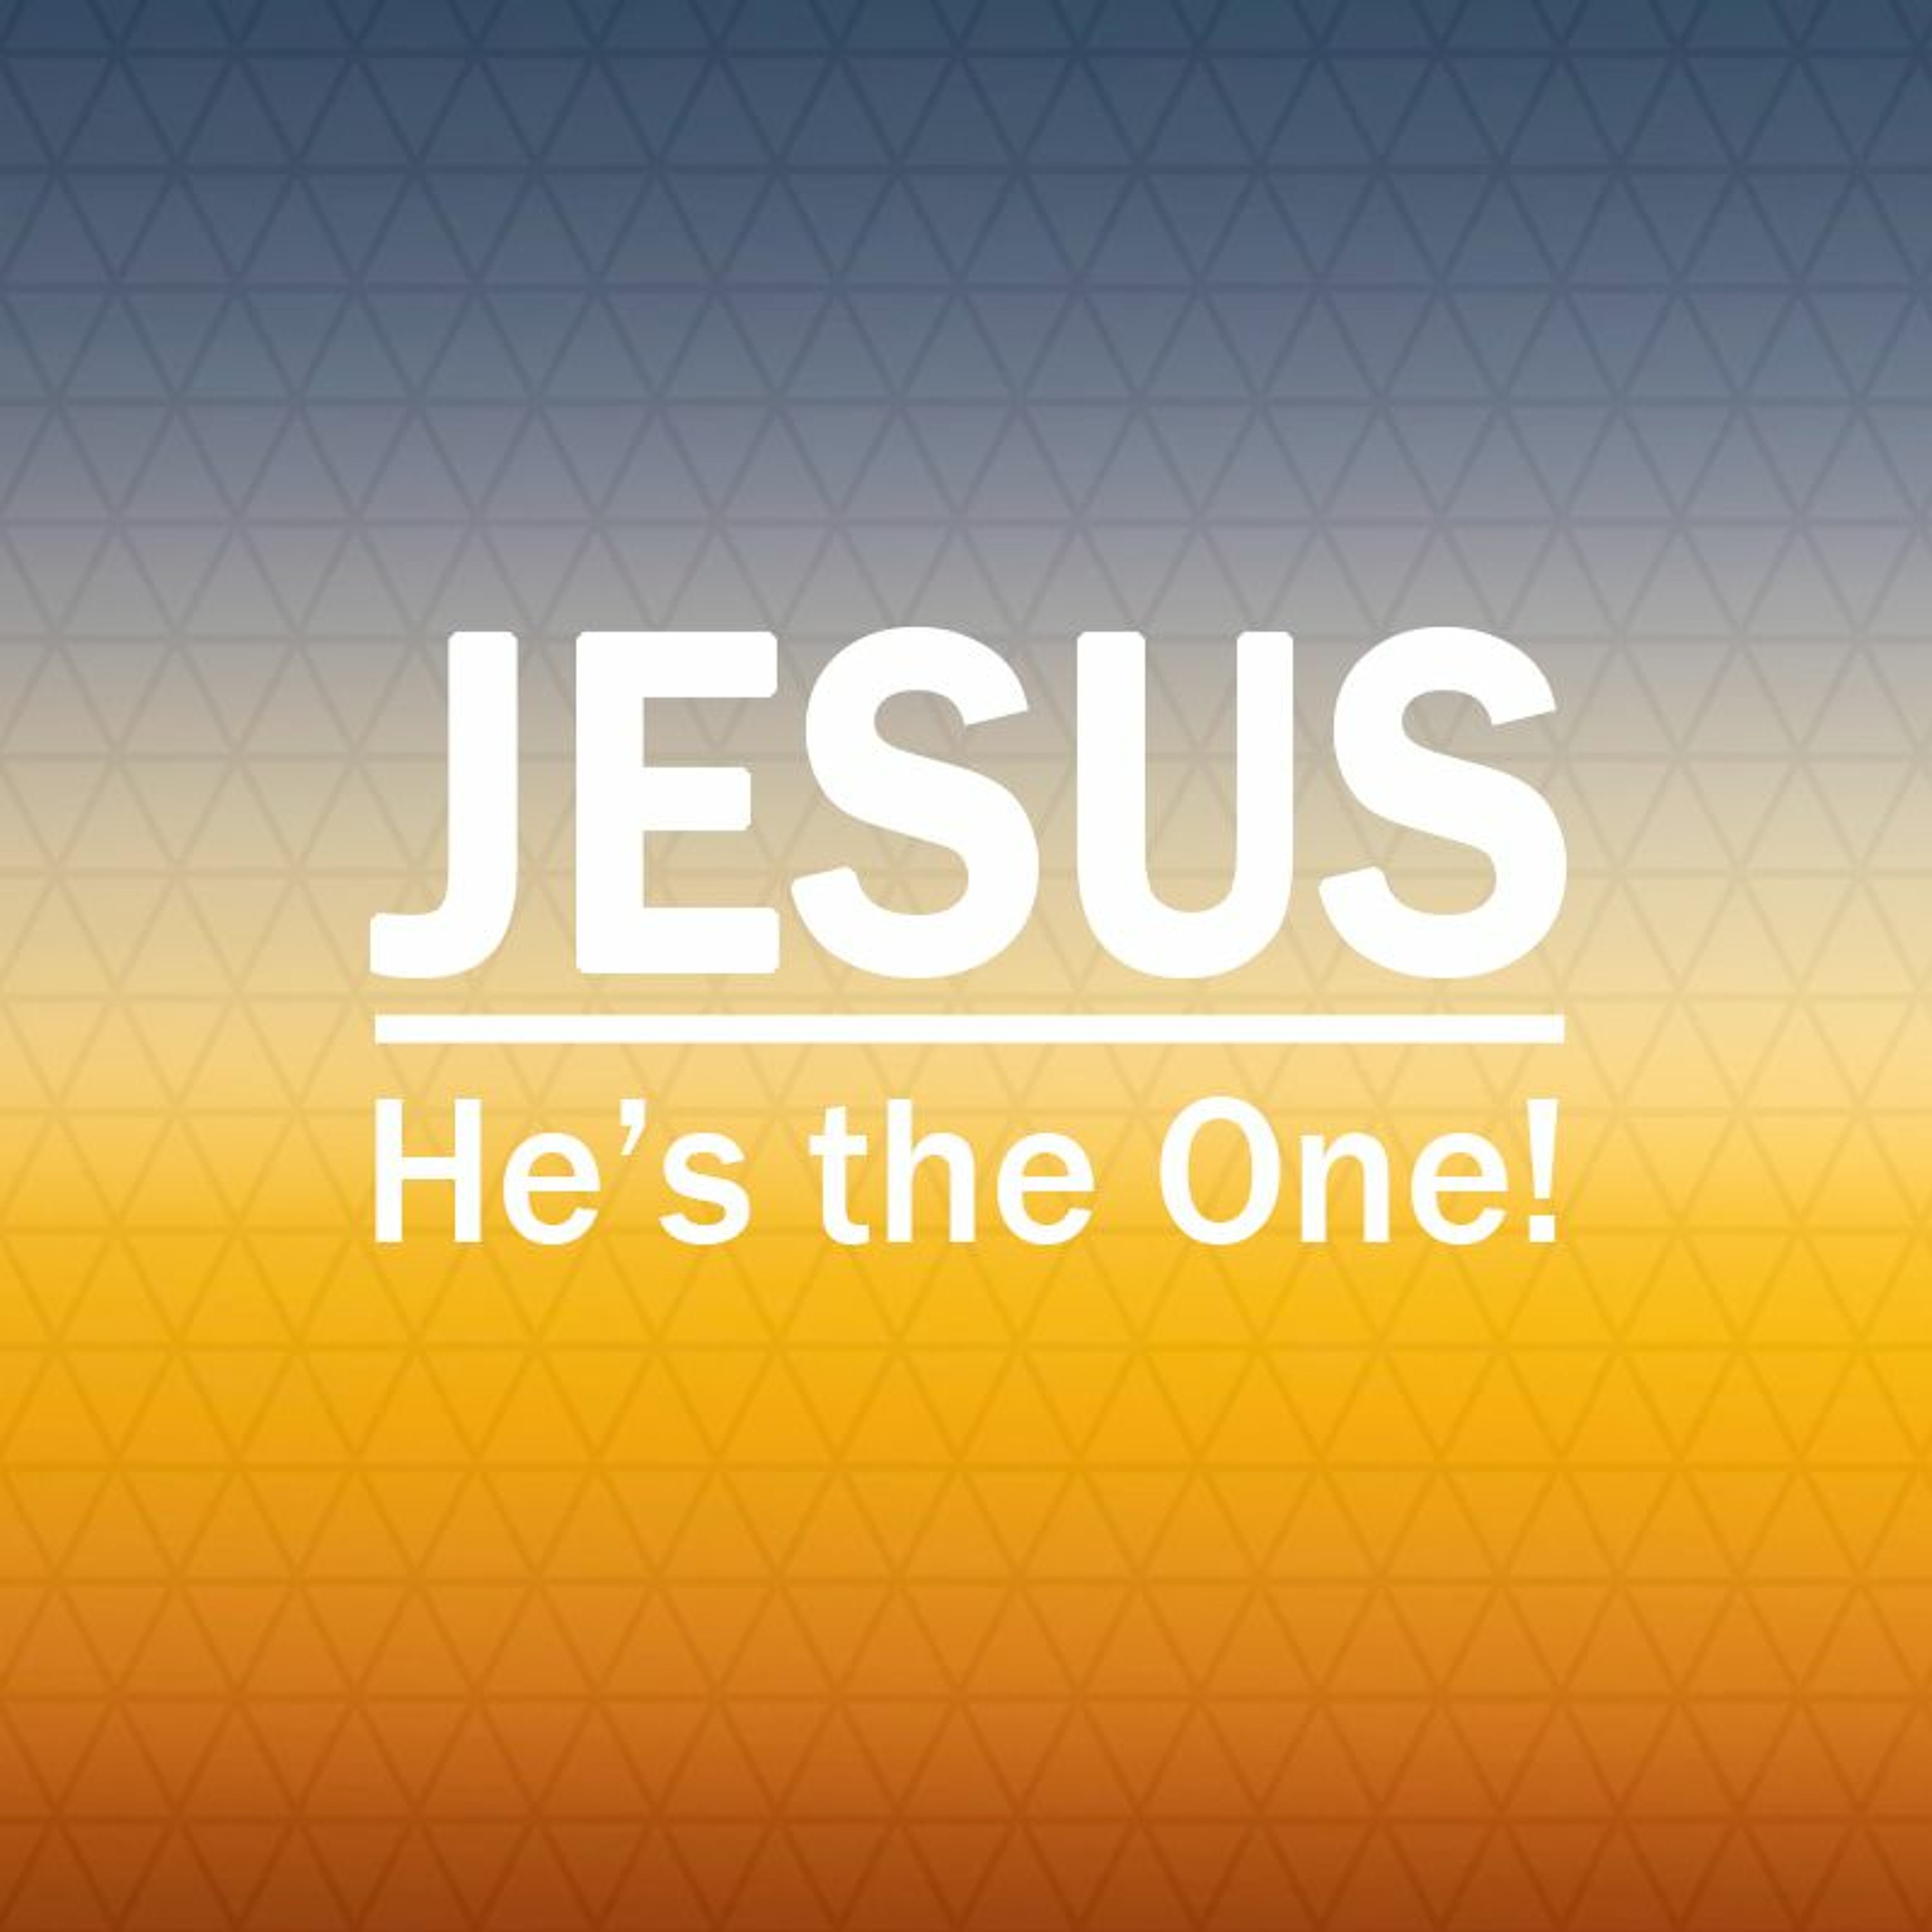 Jesus - He’s the One! | The One who forgives sins